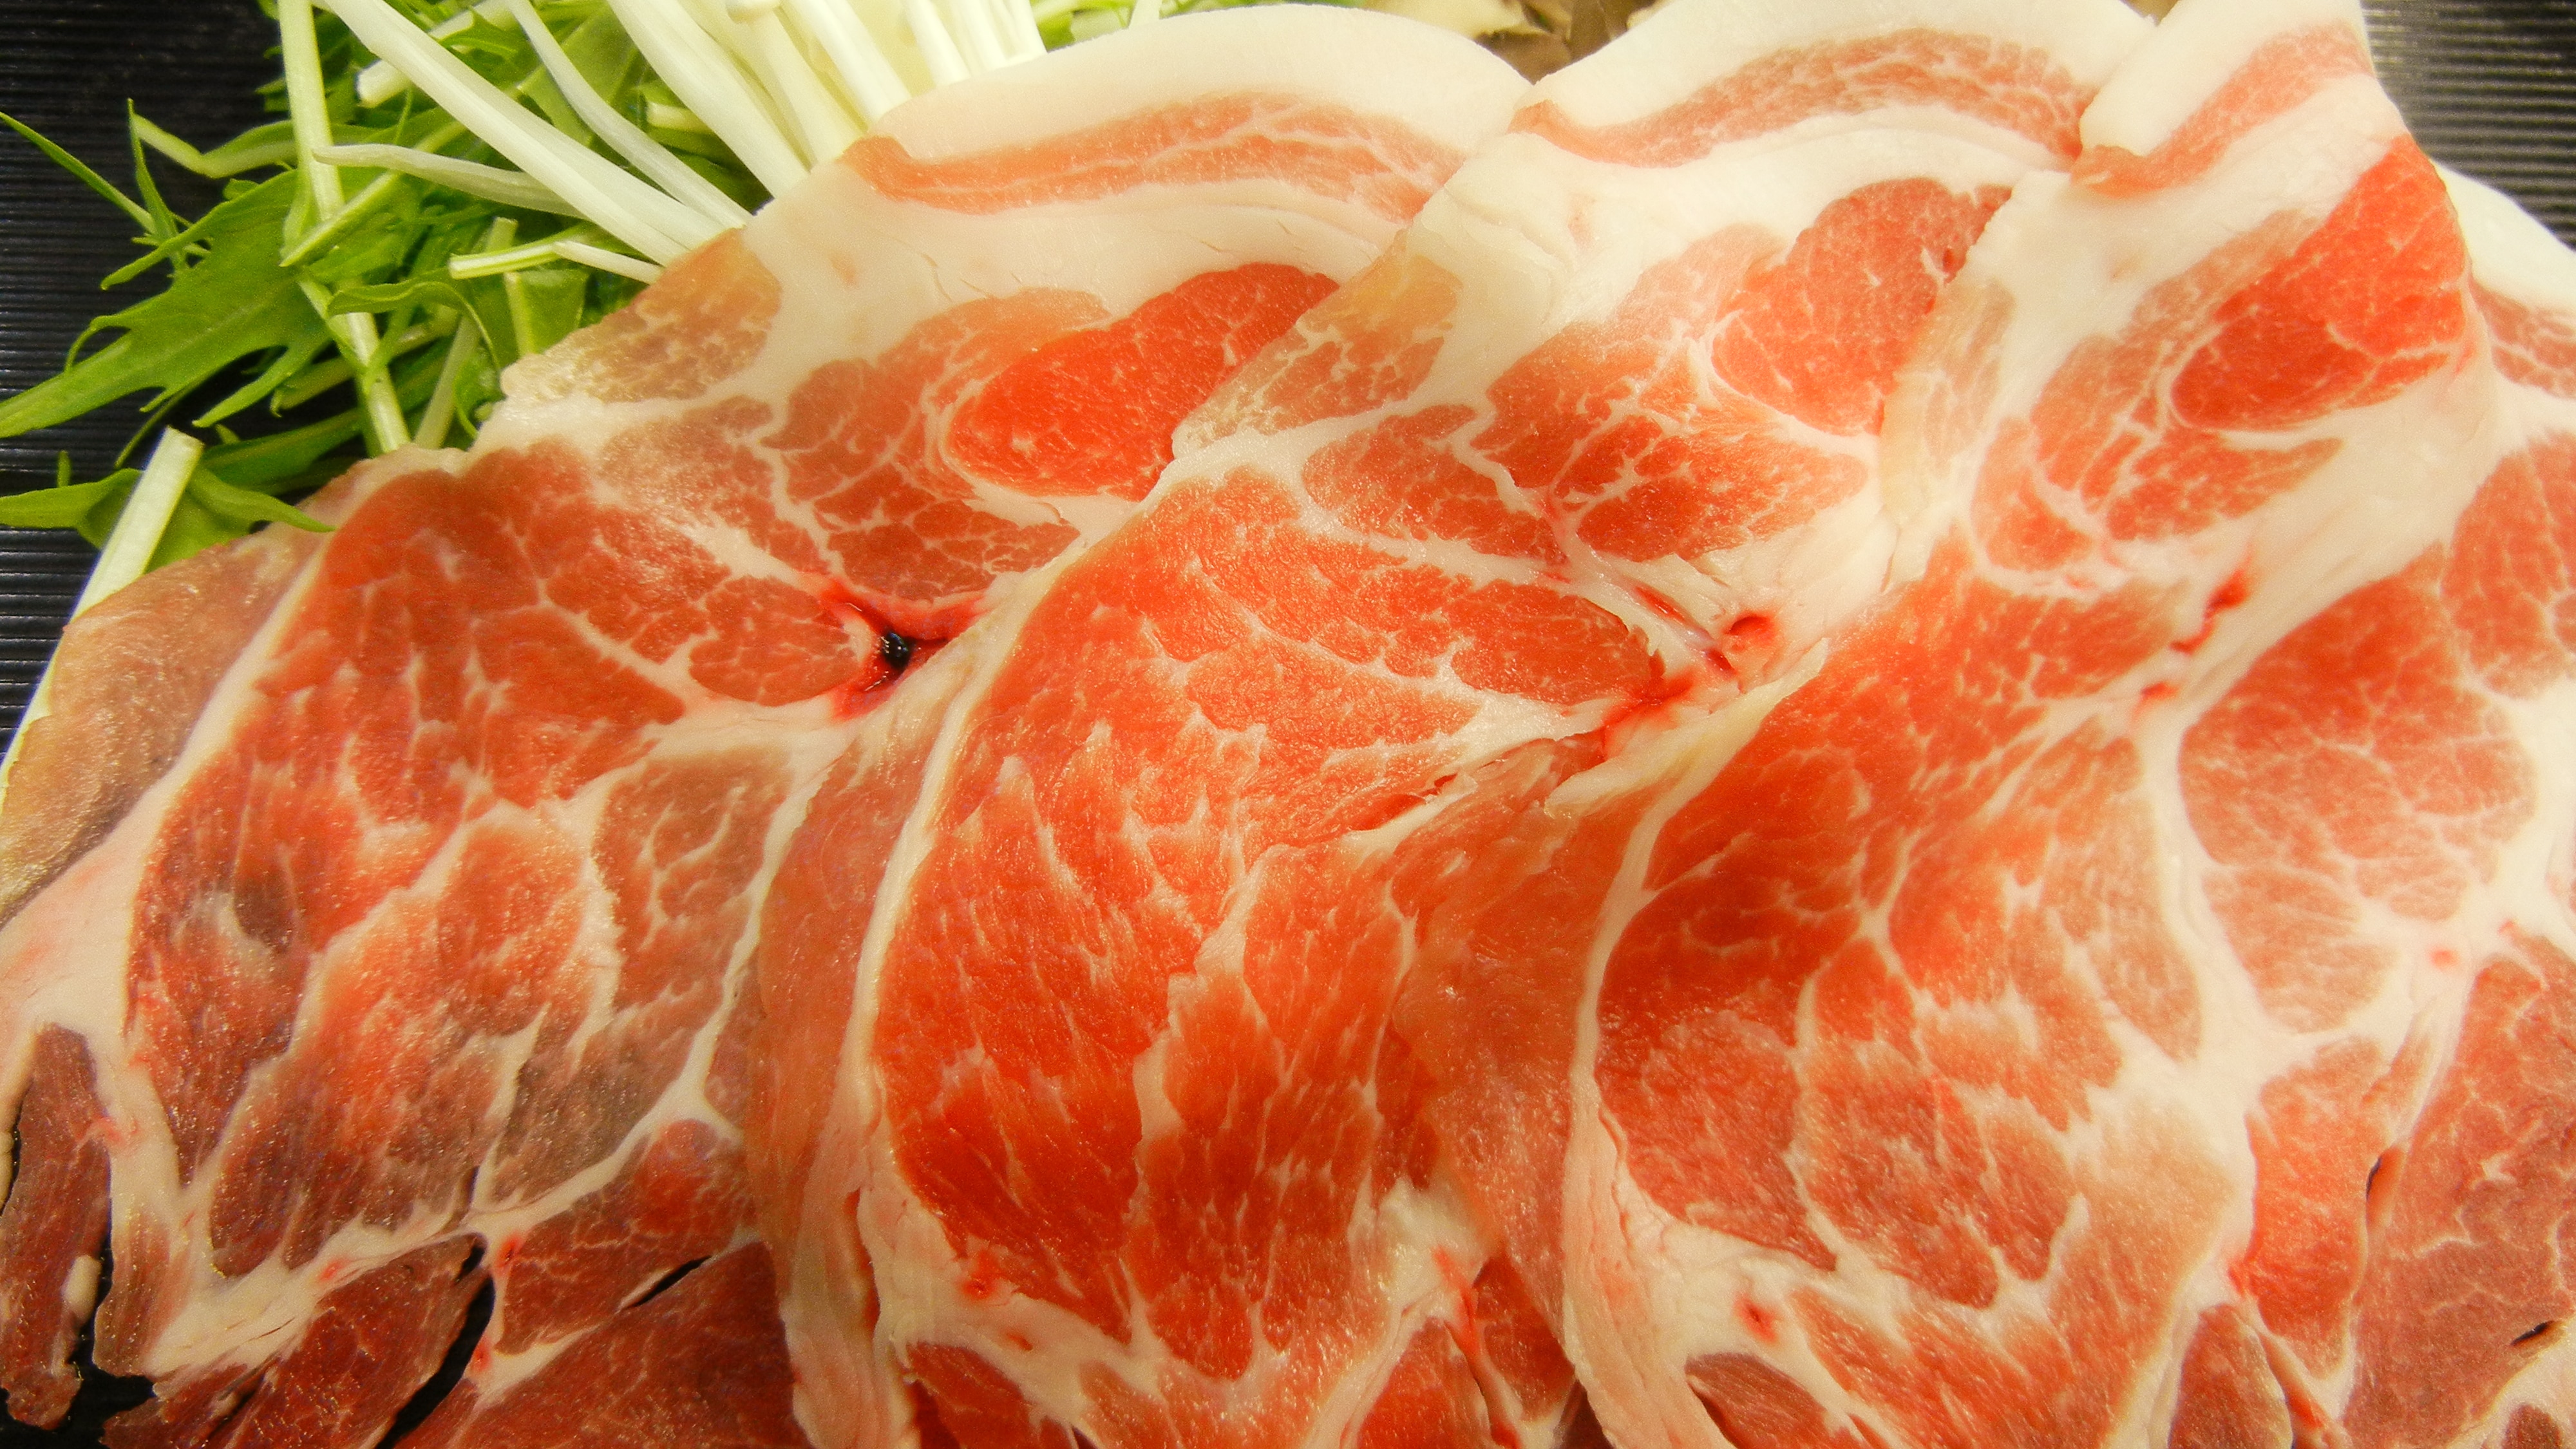 Our specialty! Thick slices of Gunma brand pork shabu-shabu are excellent in both deliciousness and response!